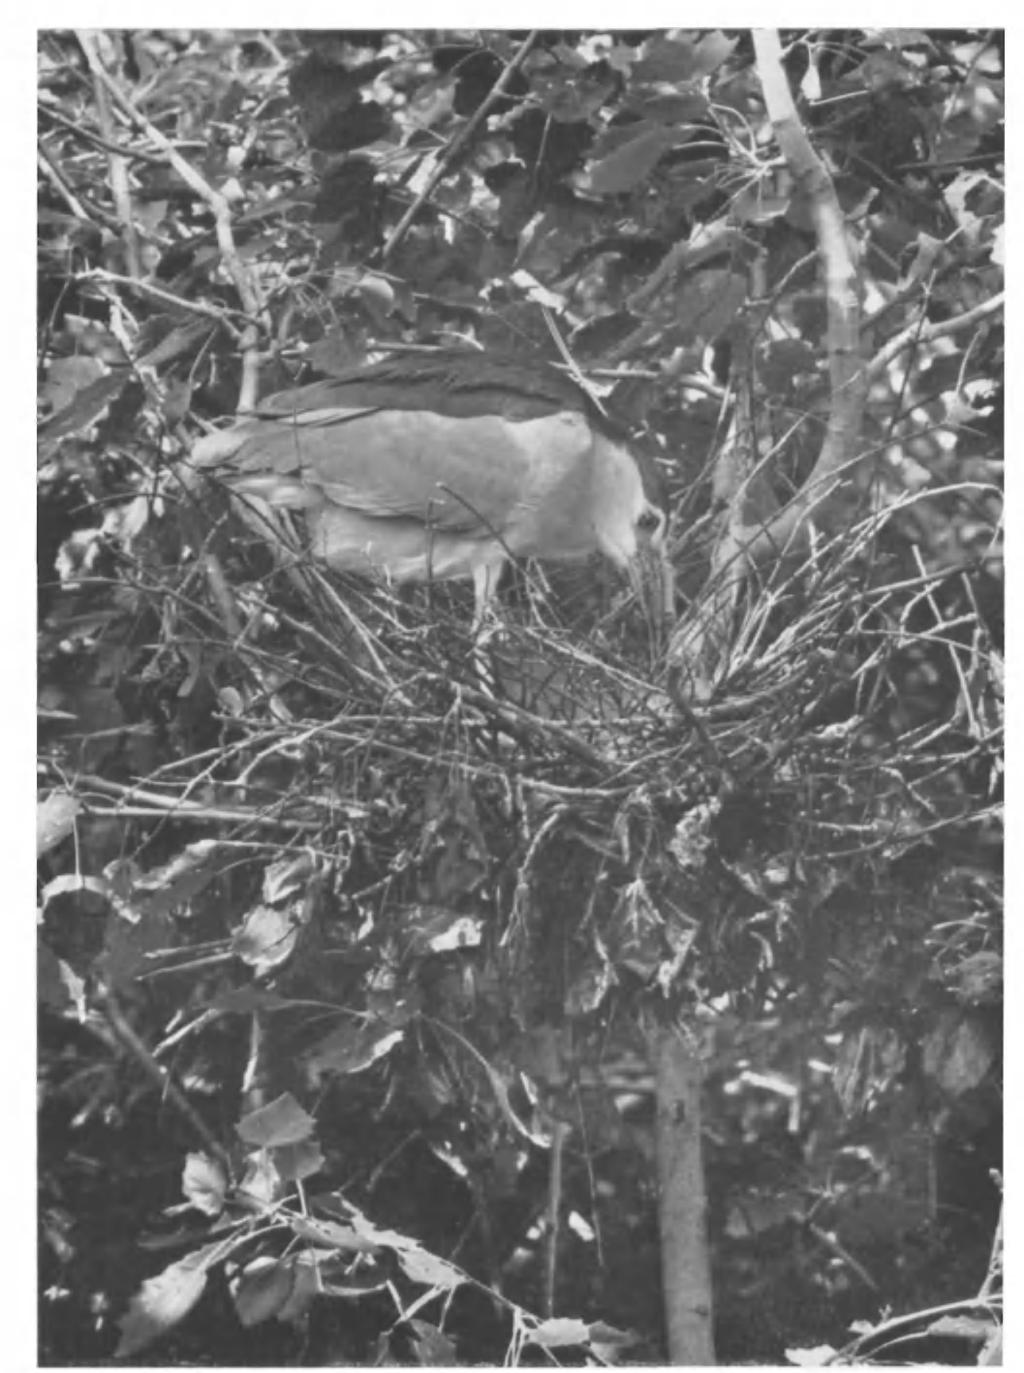 British Birds, Vol. xlvii, PI. 56. ADULT LOOKING DOWN AT YOUNG IN NEST. CAMARGUE, SOUTH FRANCE. MAY, 1953. (Photographed by C. C. DONCASTER).